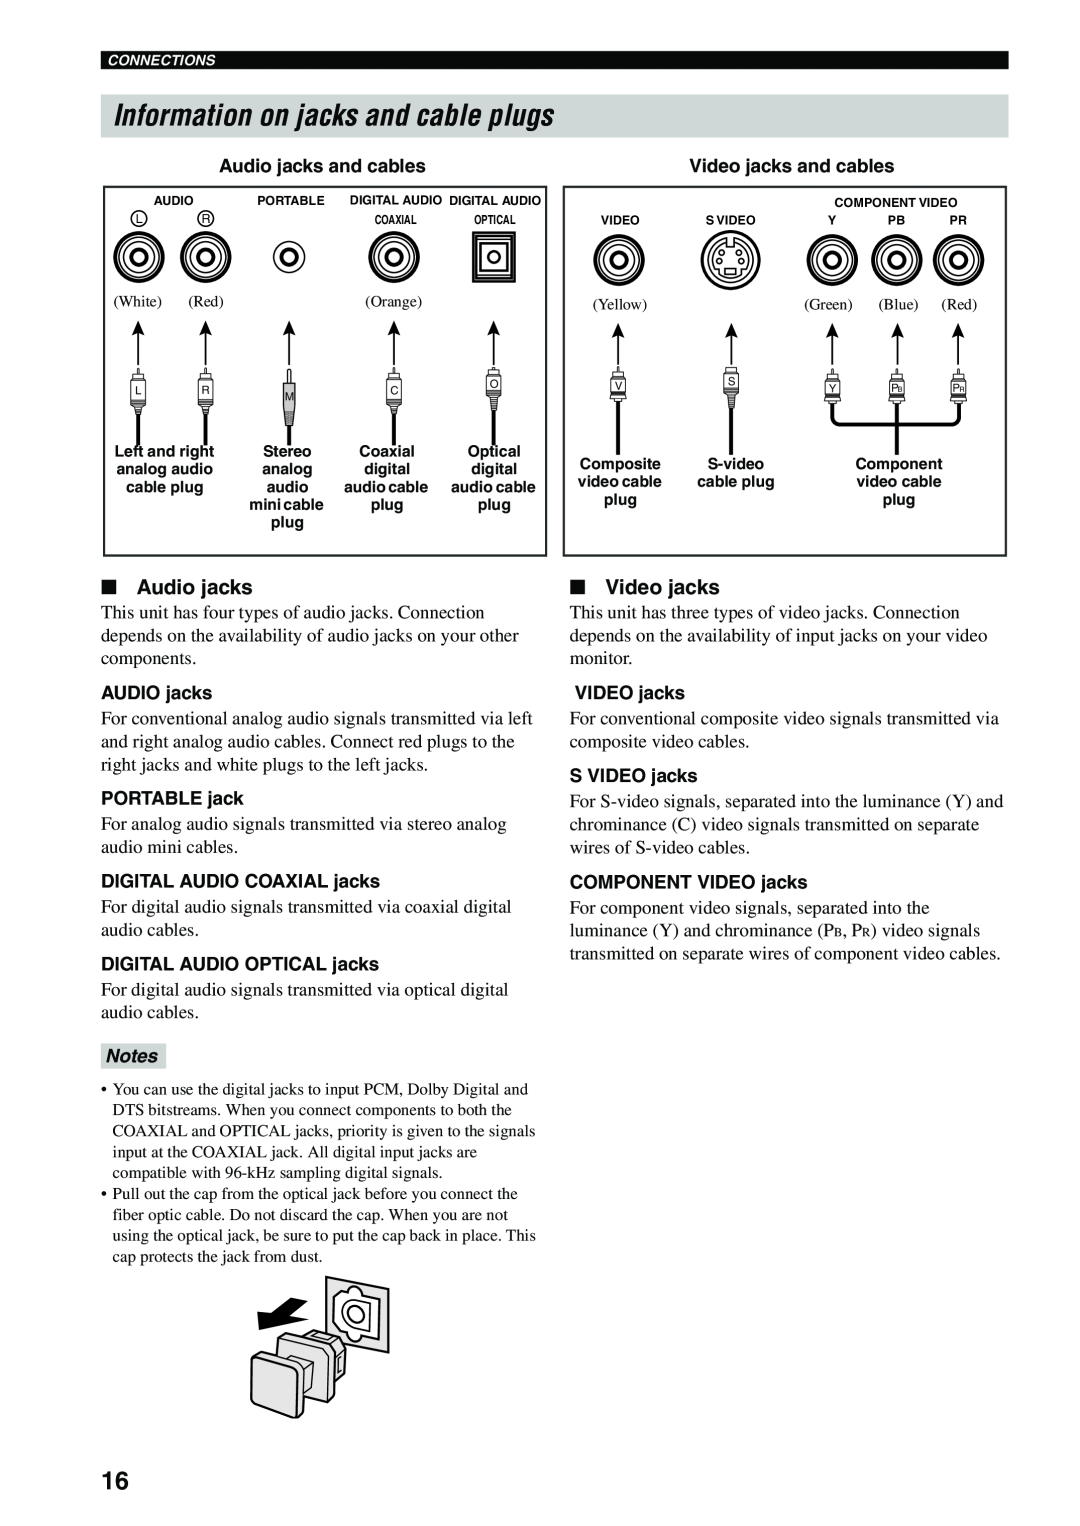 Yamaha HTR-5940 AV Information on jacks and cable plugs, Audio jacks and cables, Video jacks and cables, Notes 